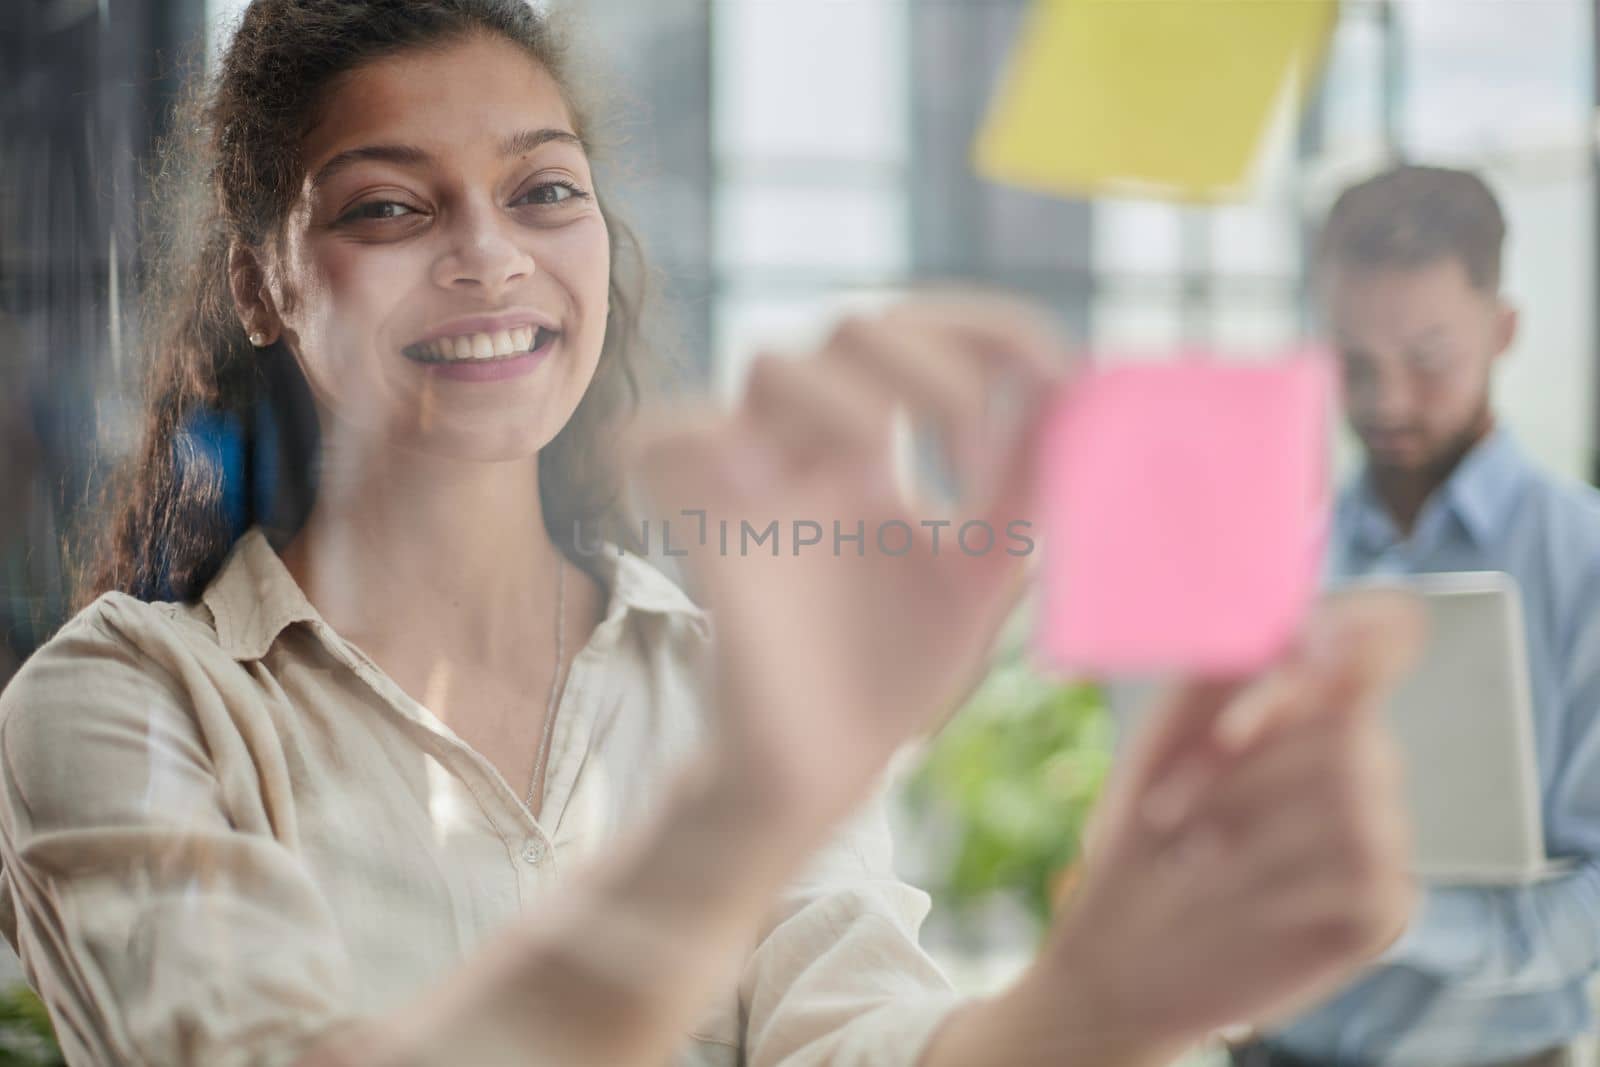 Bringing her vision to life. Shot of a confident businesswoman presenting an idea to her colleague using adhesive notes on a glass wall in the office. by Prosto